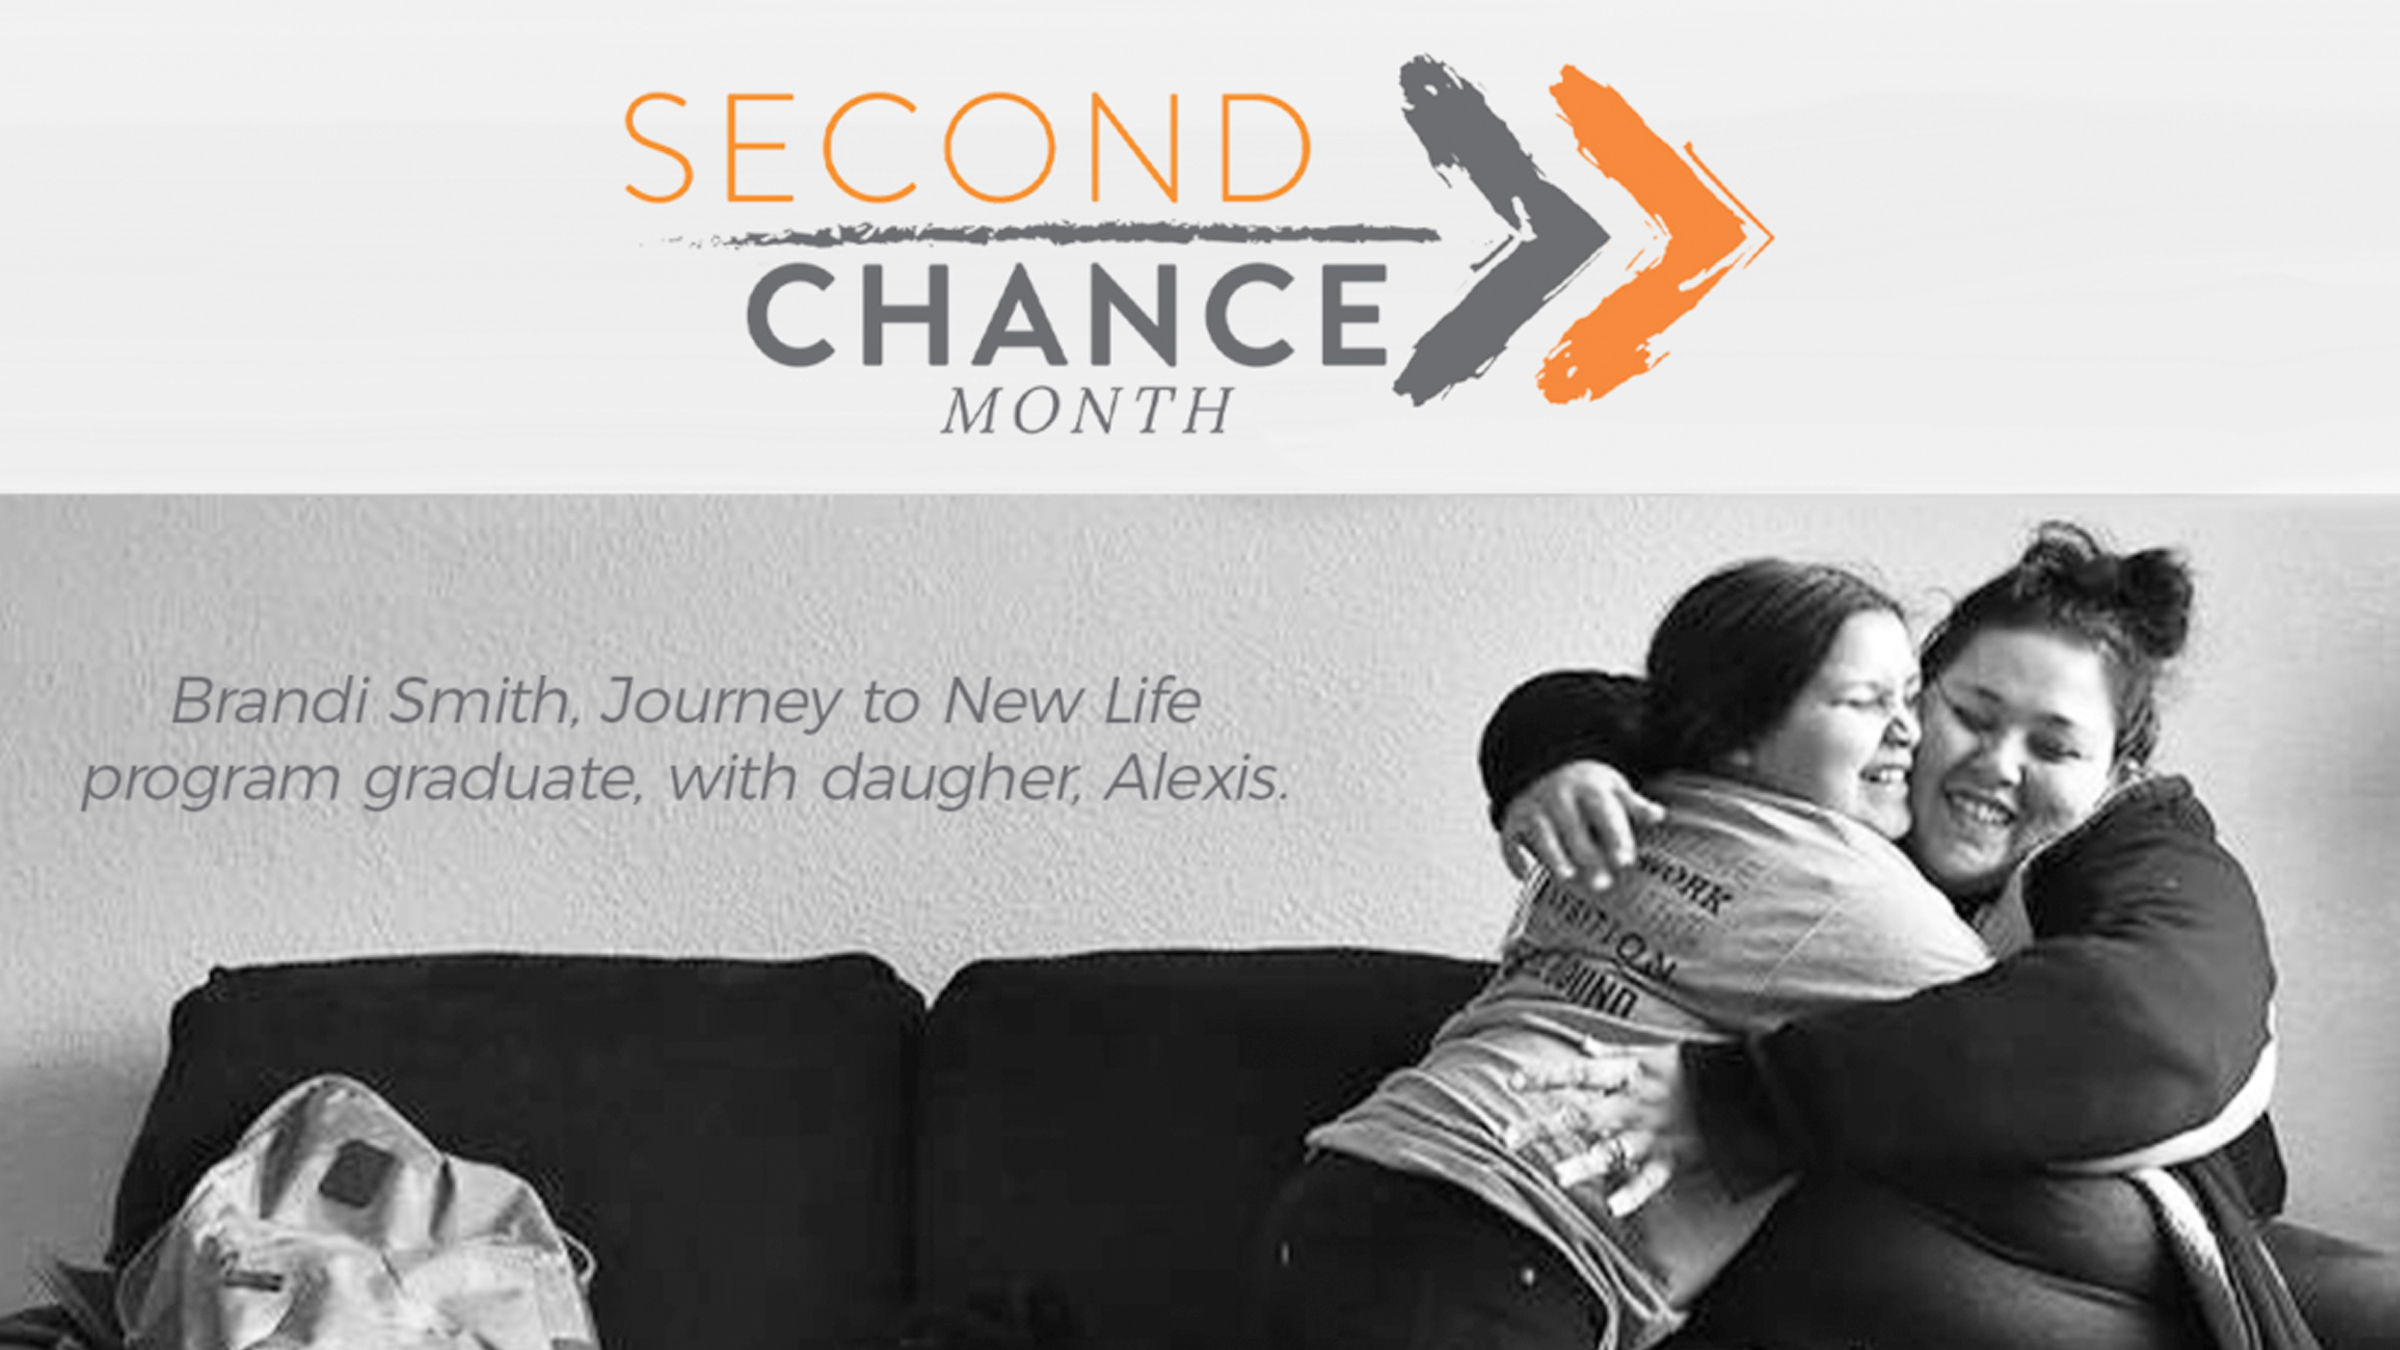 Second Chance Month Helps Raise Awareness Journey to New Life, Inc.